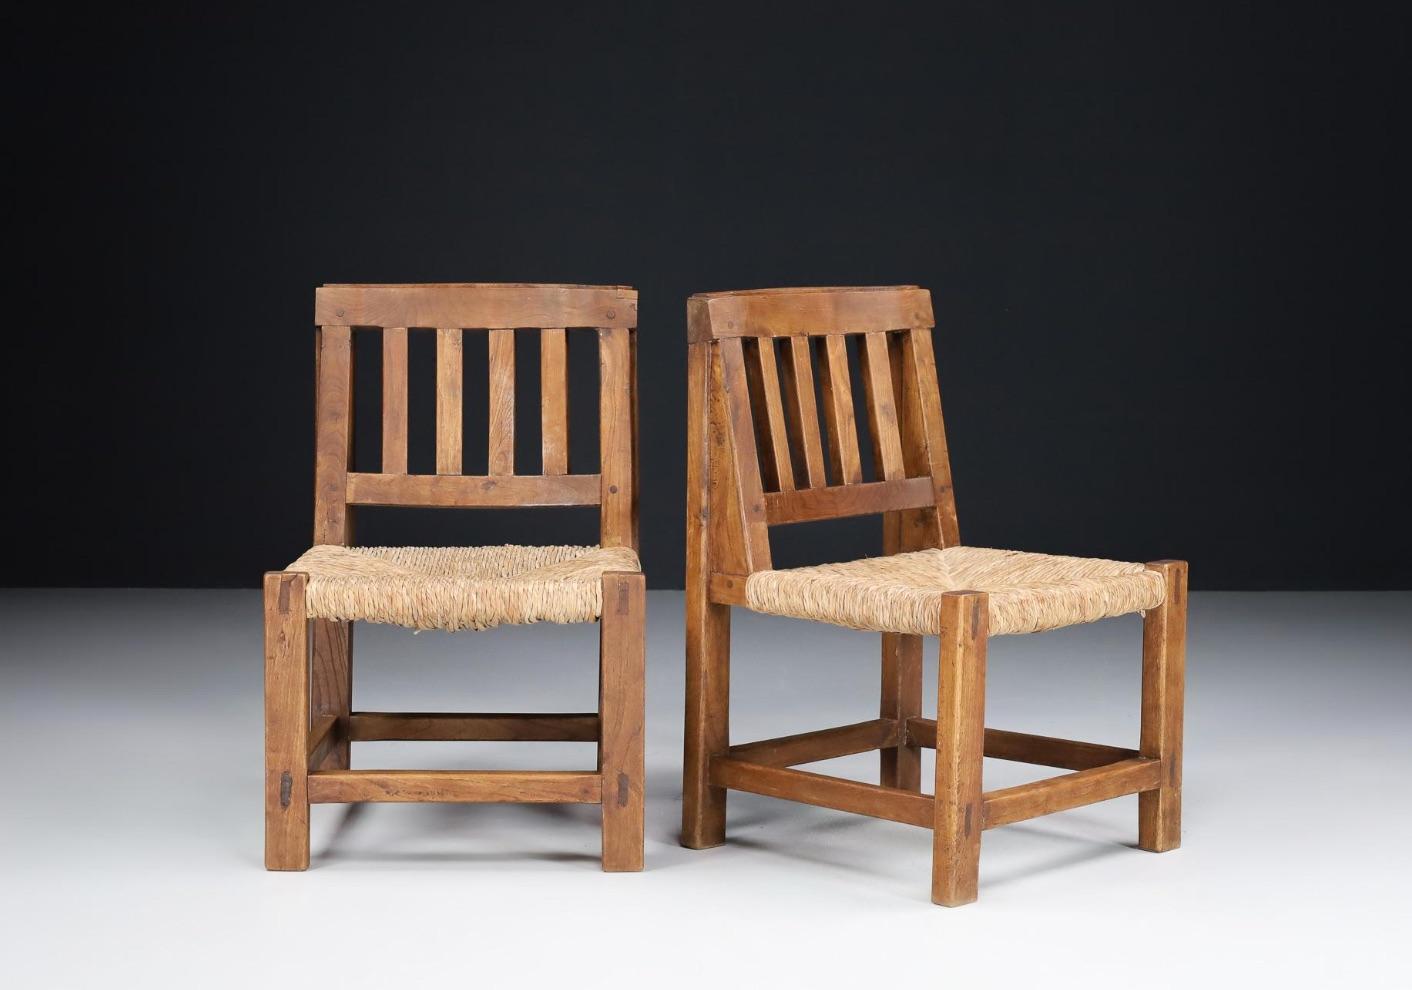 These chairs are made of a sturdy pine wood frame and have a traditional rush seating. The style is at once rustic/primitive and sophisticated as well.